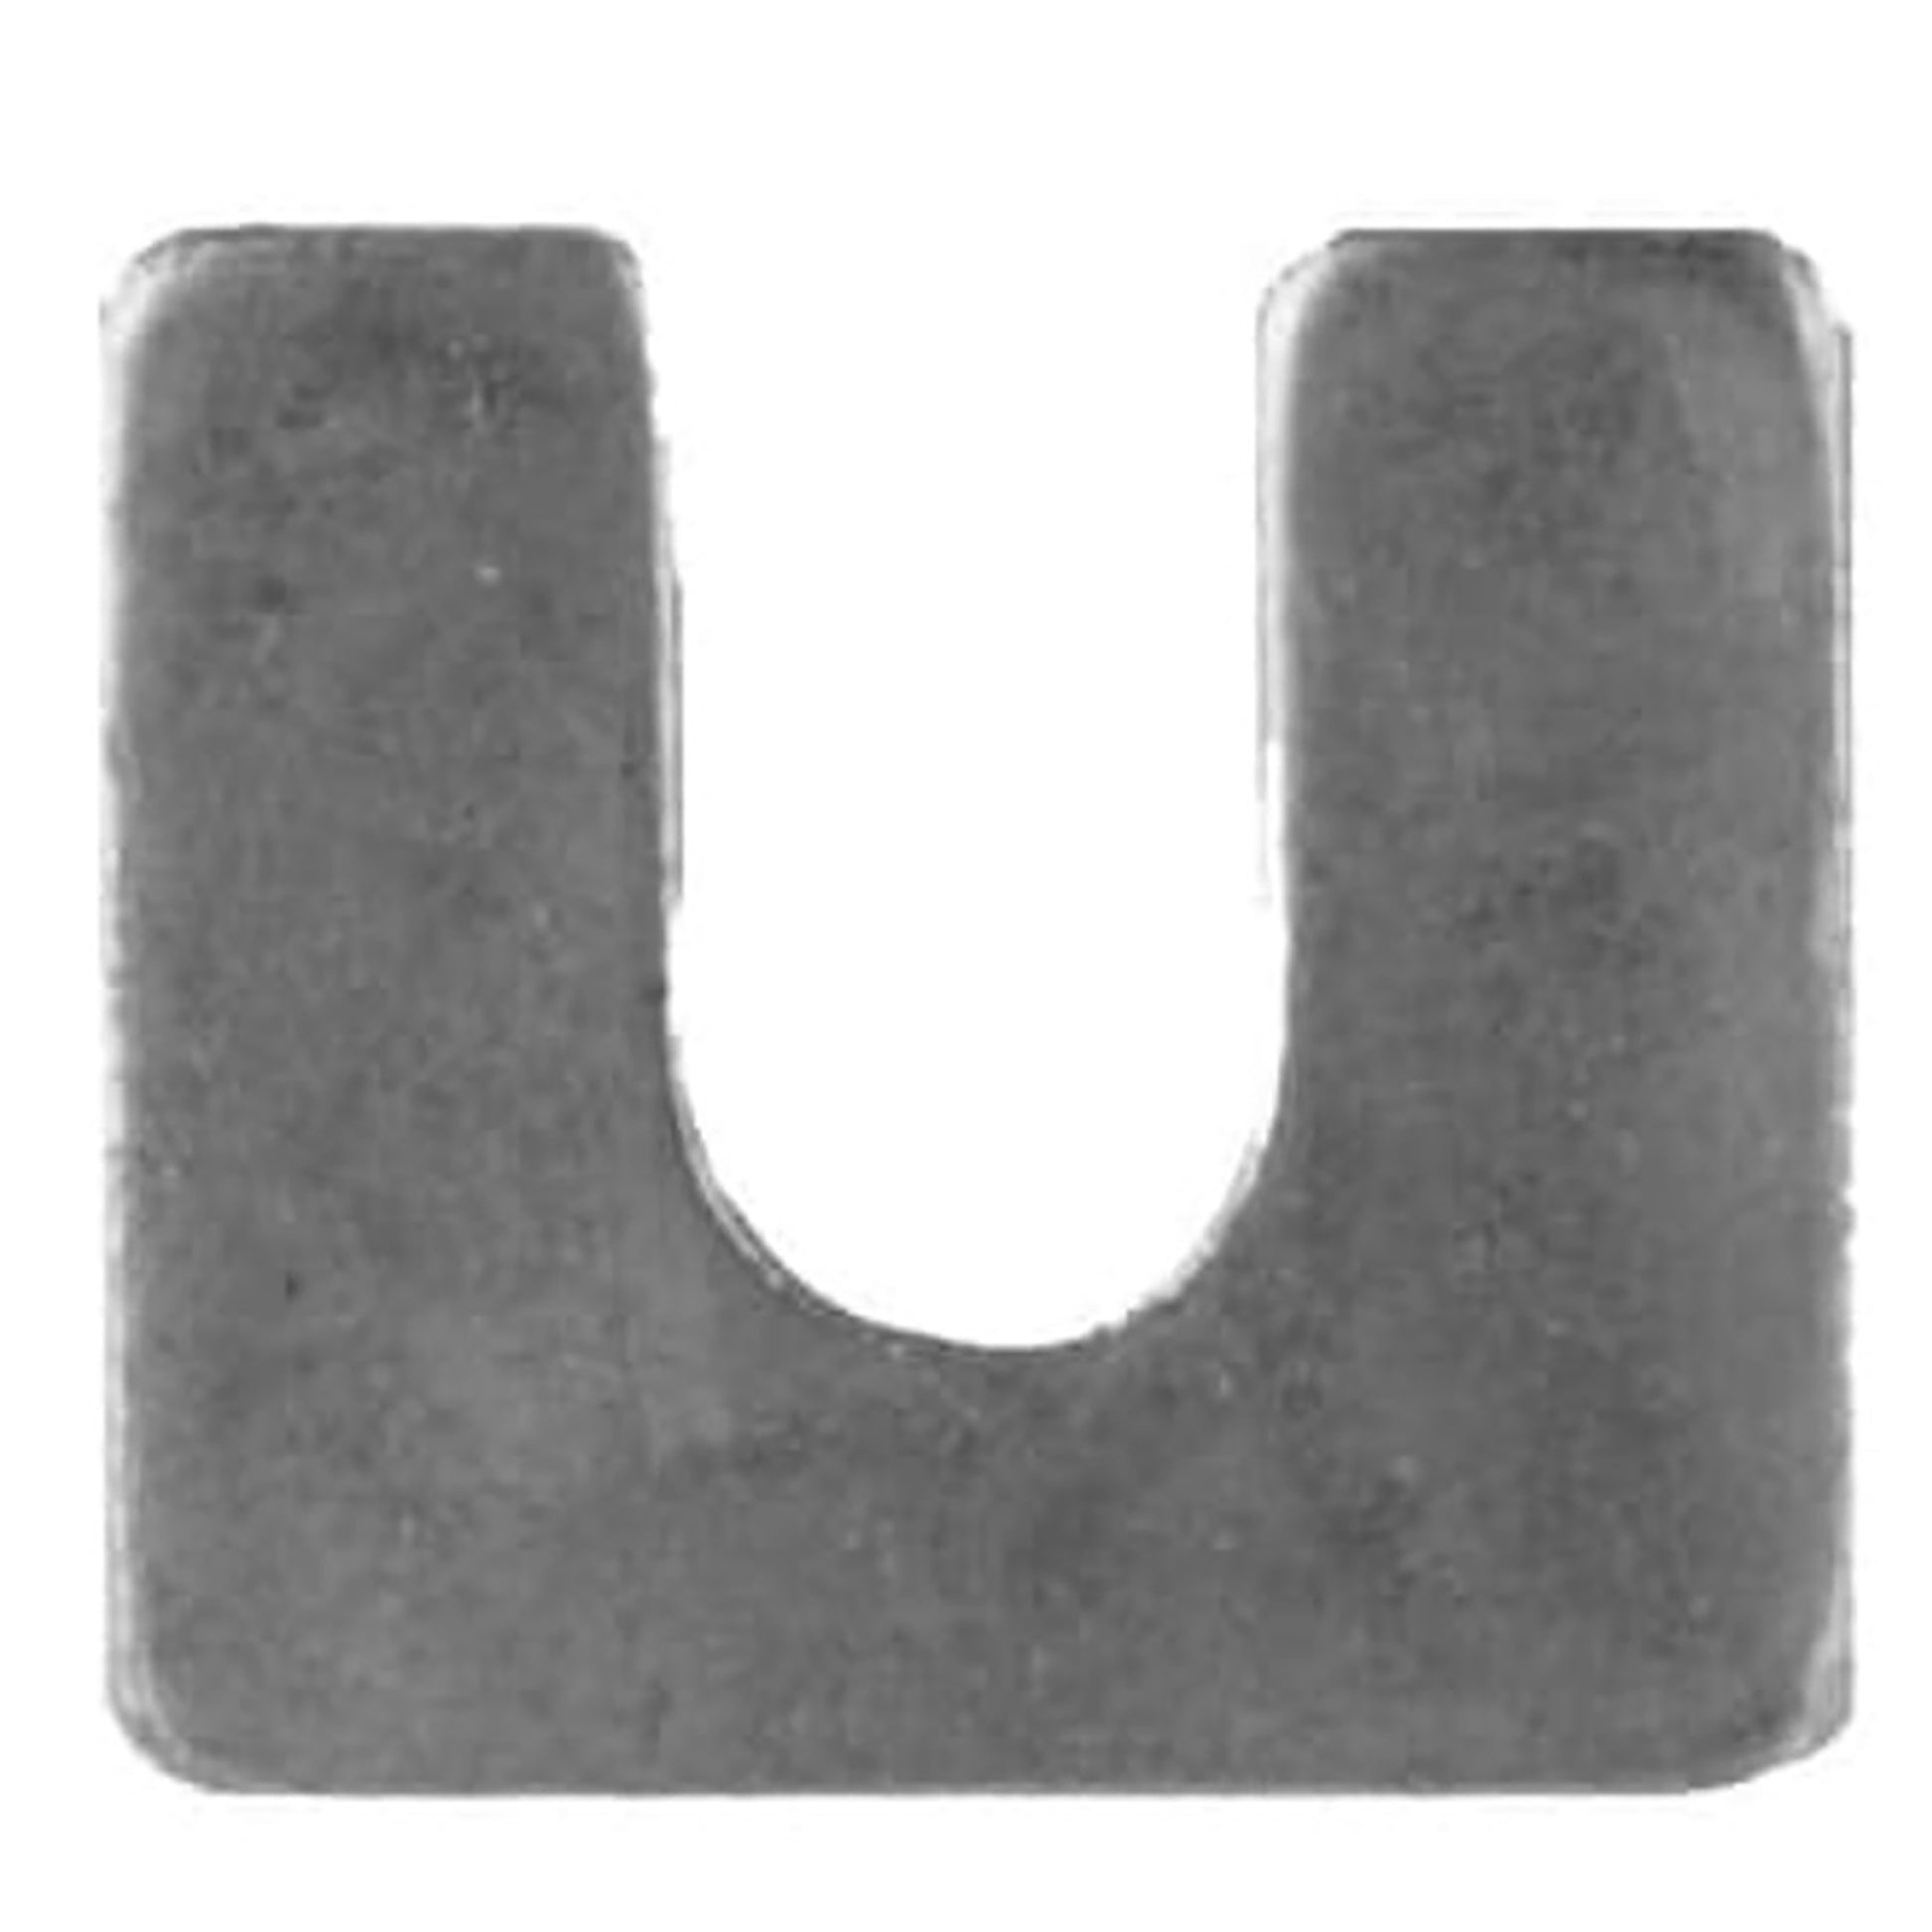 Zinc Plated Steel Body Shims - 1/16" Thick - 3/8" Slot - 1 1/4" x 1 1/8" O.D. - 100 Pack